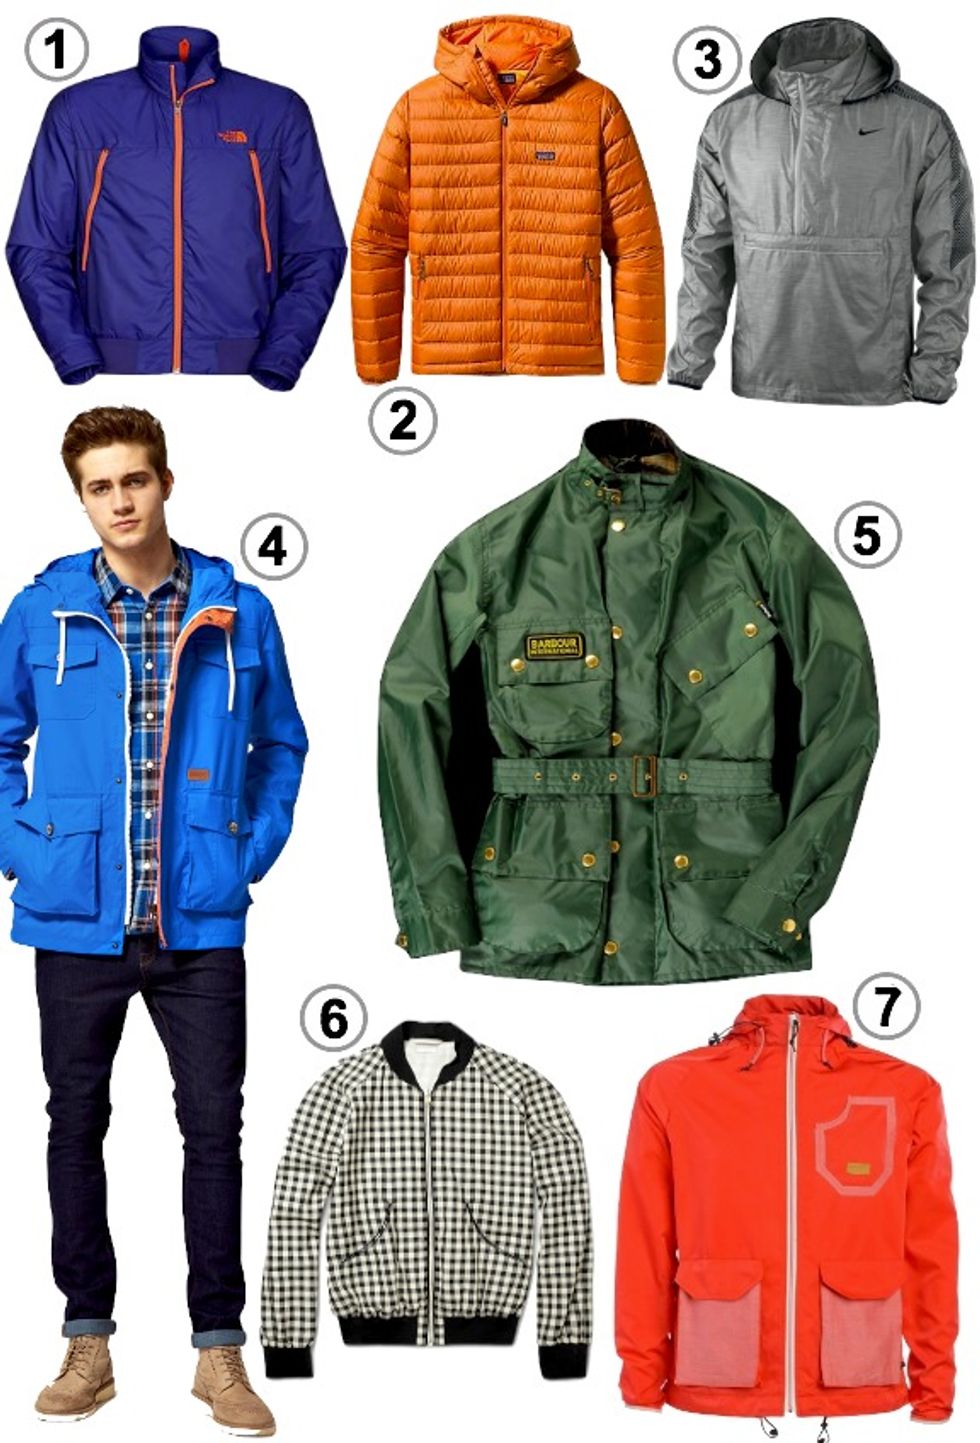 Look of the Week: Men's Sporty-Chic Spring Jackets